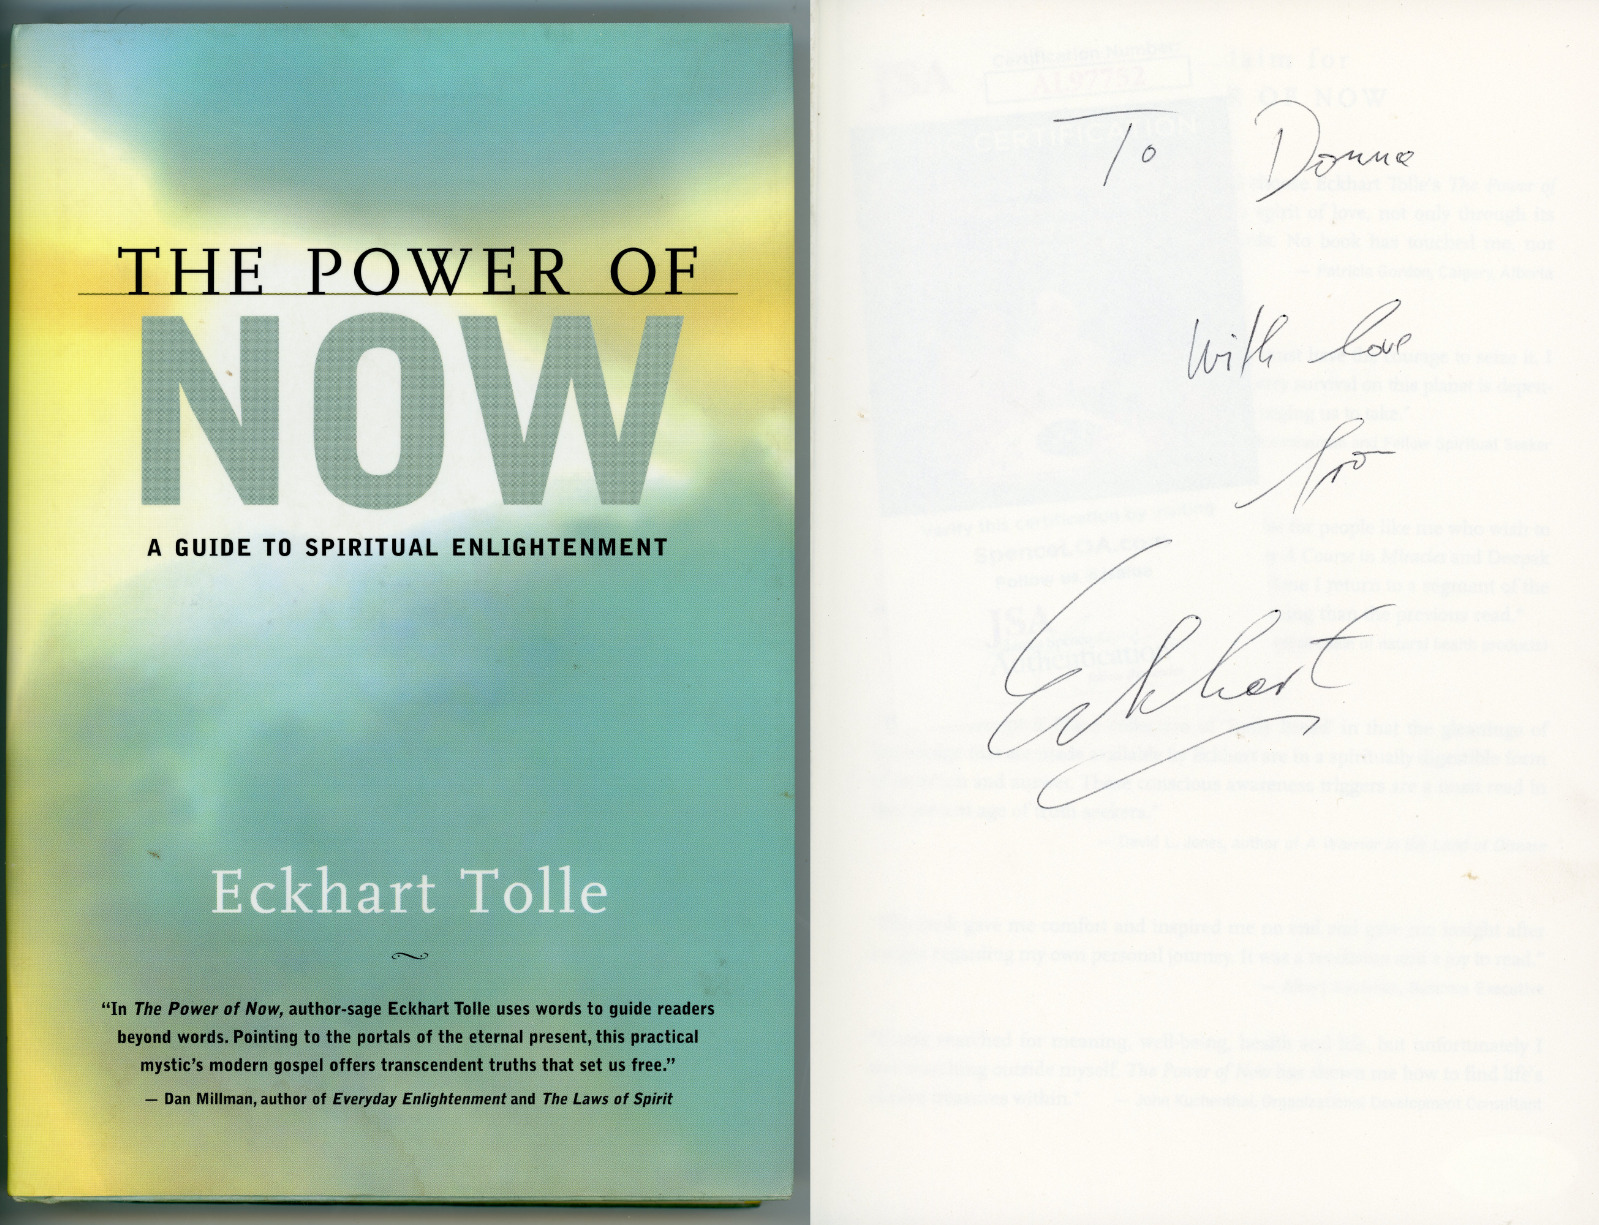 Eckhart Tolle ~ Signed The Power of Now Autographed 1st Edition Book ~ JSA COA